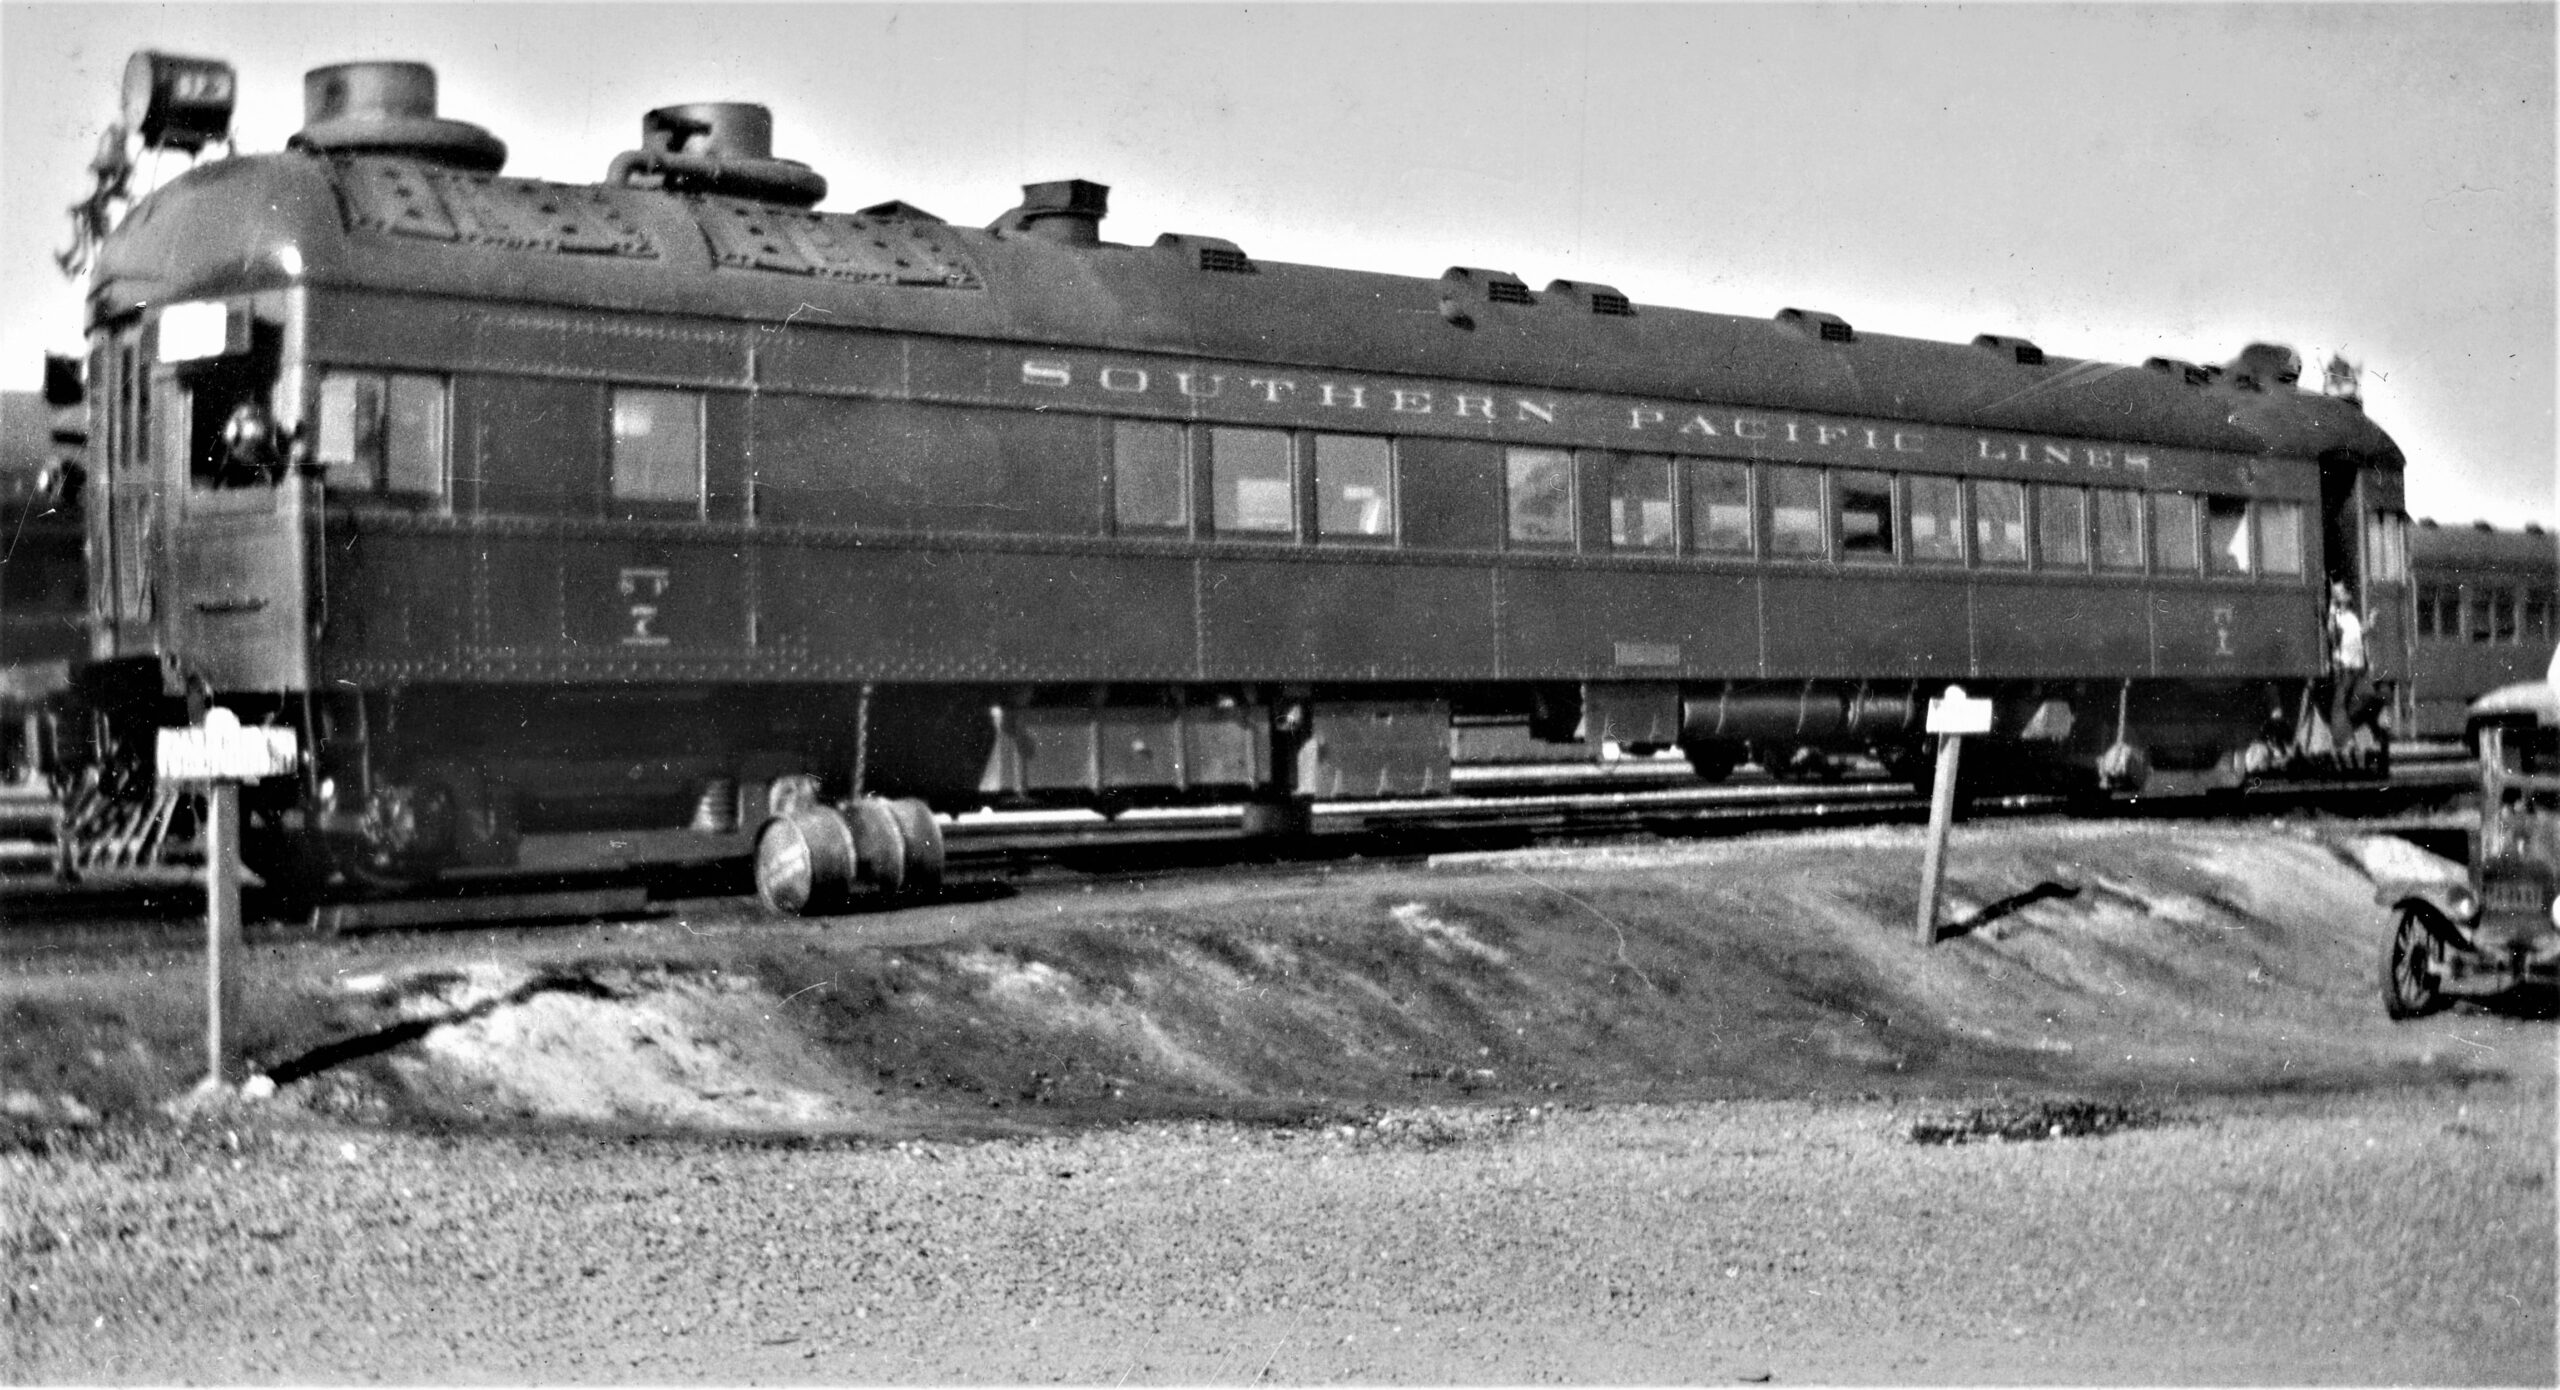 Southern Pacific Lines | Sacramento, California | Motorcar #7 | June 25,1932 | D.W. Thickens photograph